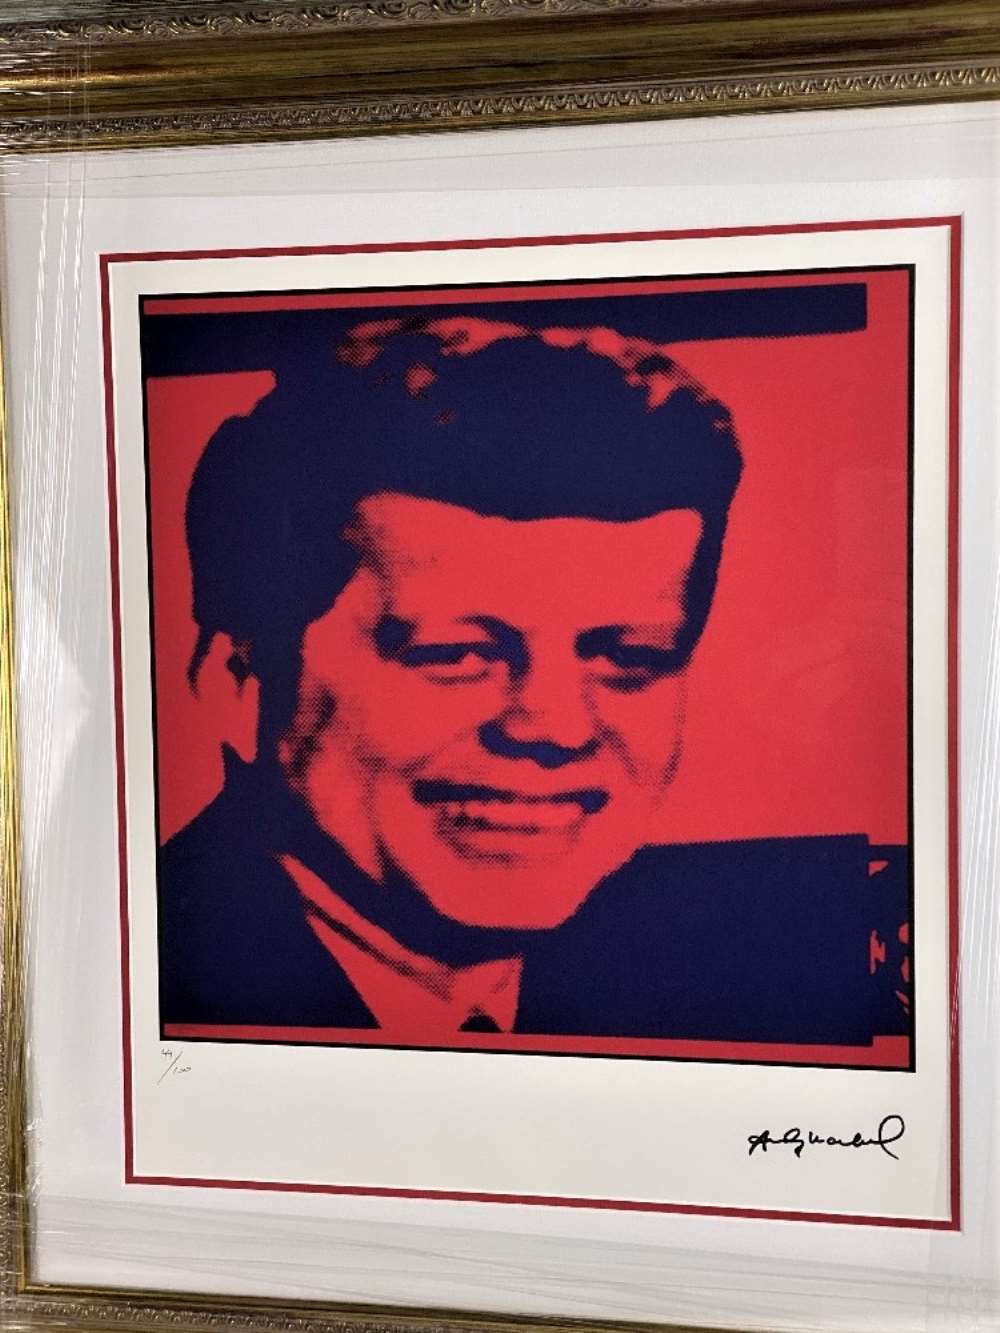 Andy Warhol (1928-1987) “Kennedy” Numbered #44/100 Lithograph - Image 2 of 7